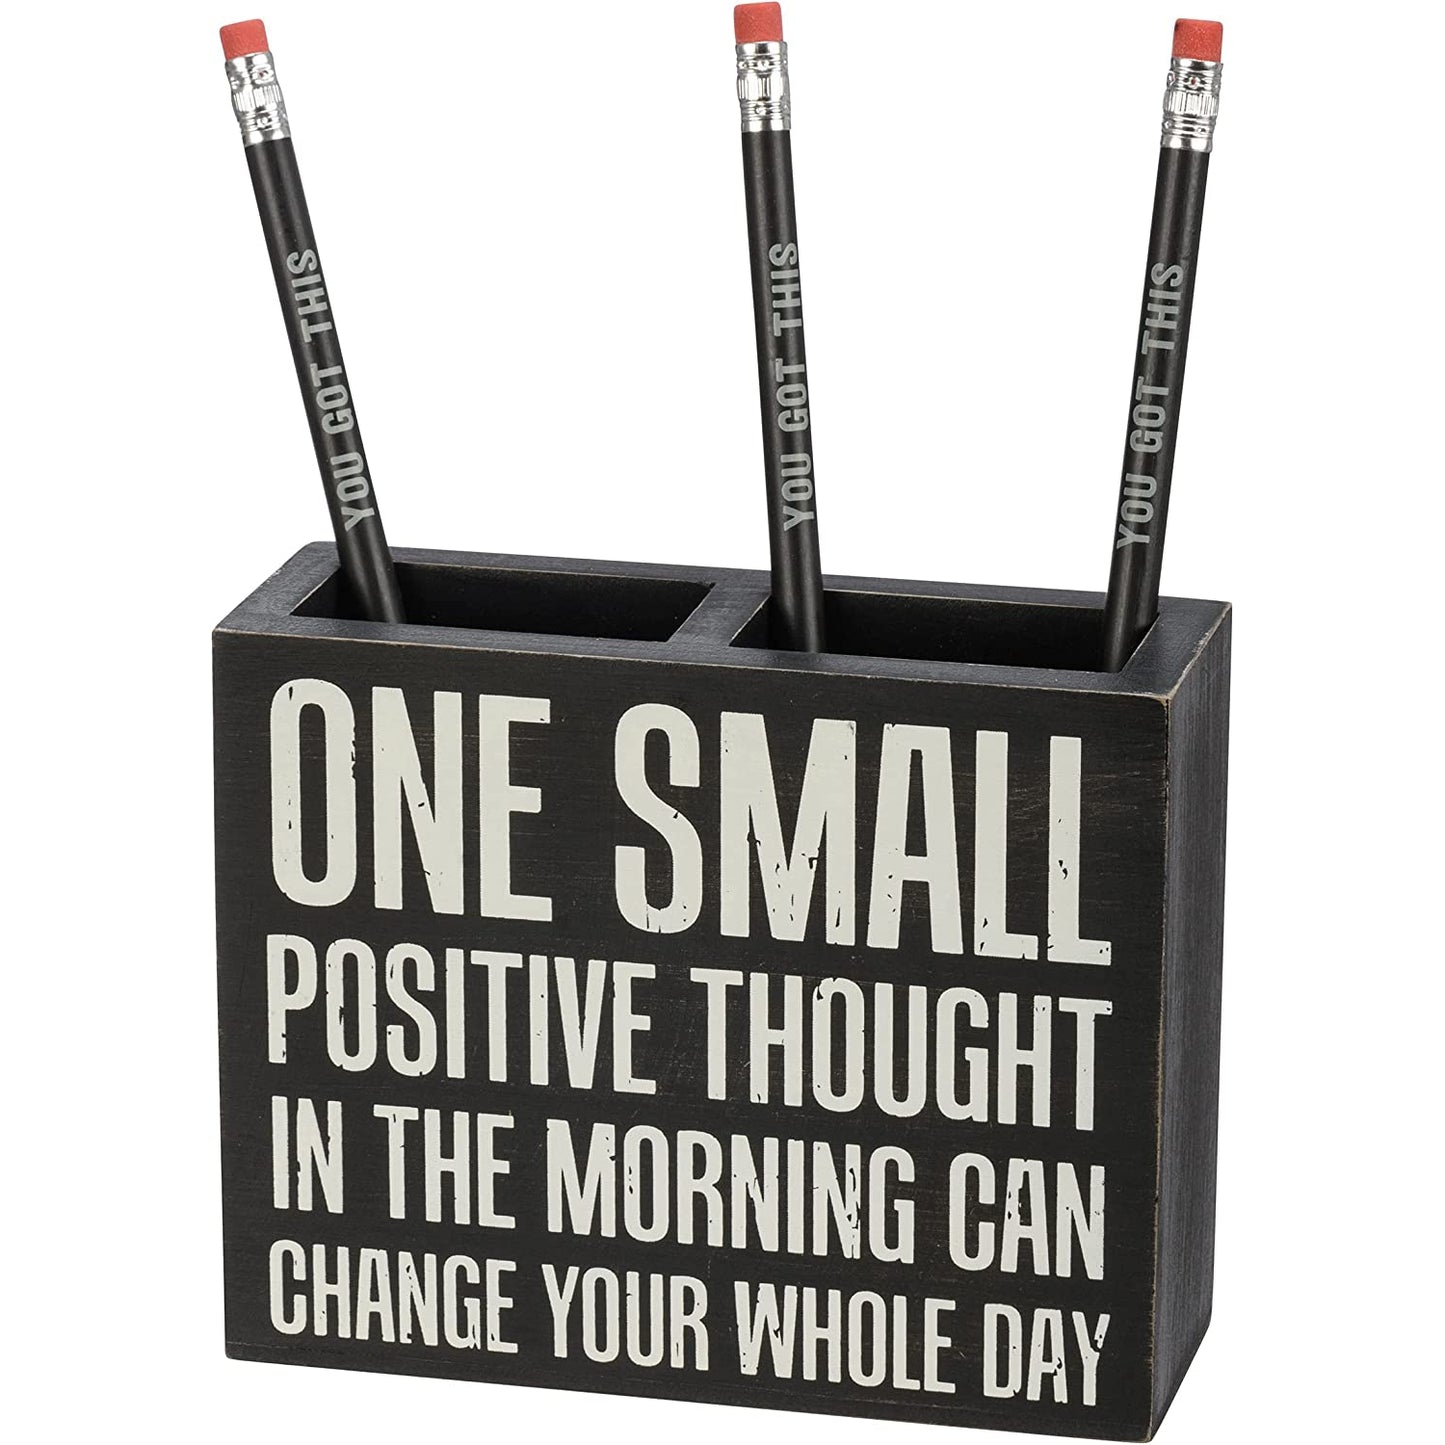 One Small Positive Thought Stationery Set | Giftable | Notebooks, Pencils, Pen Holder